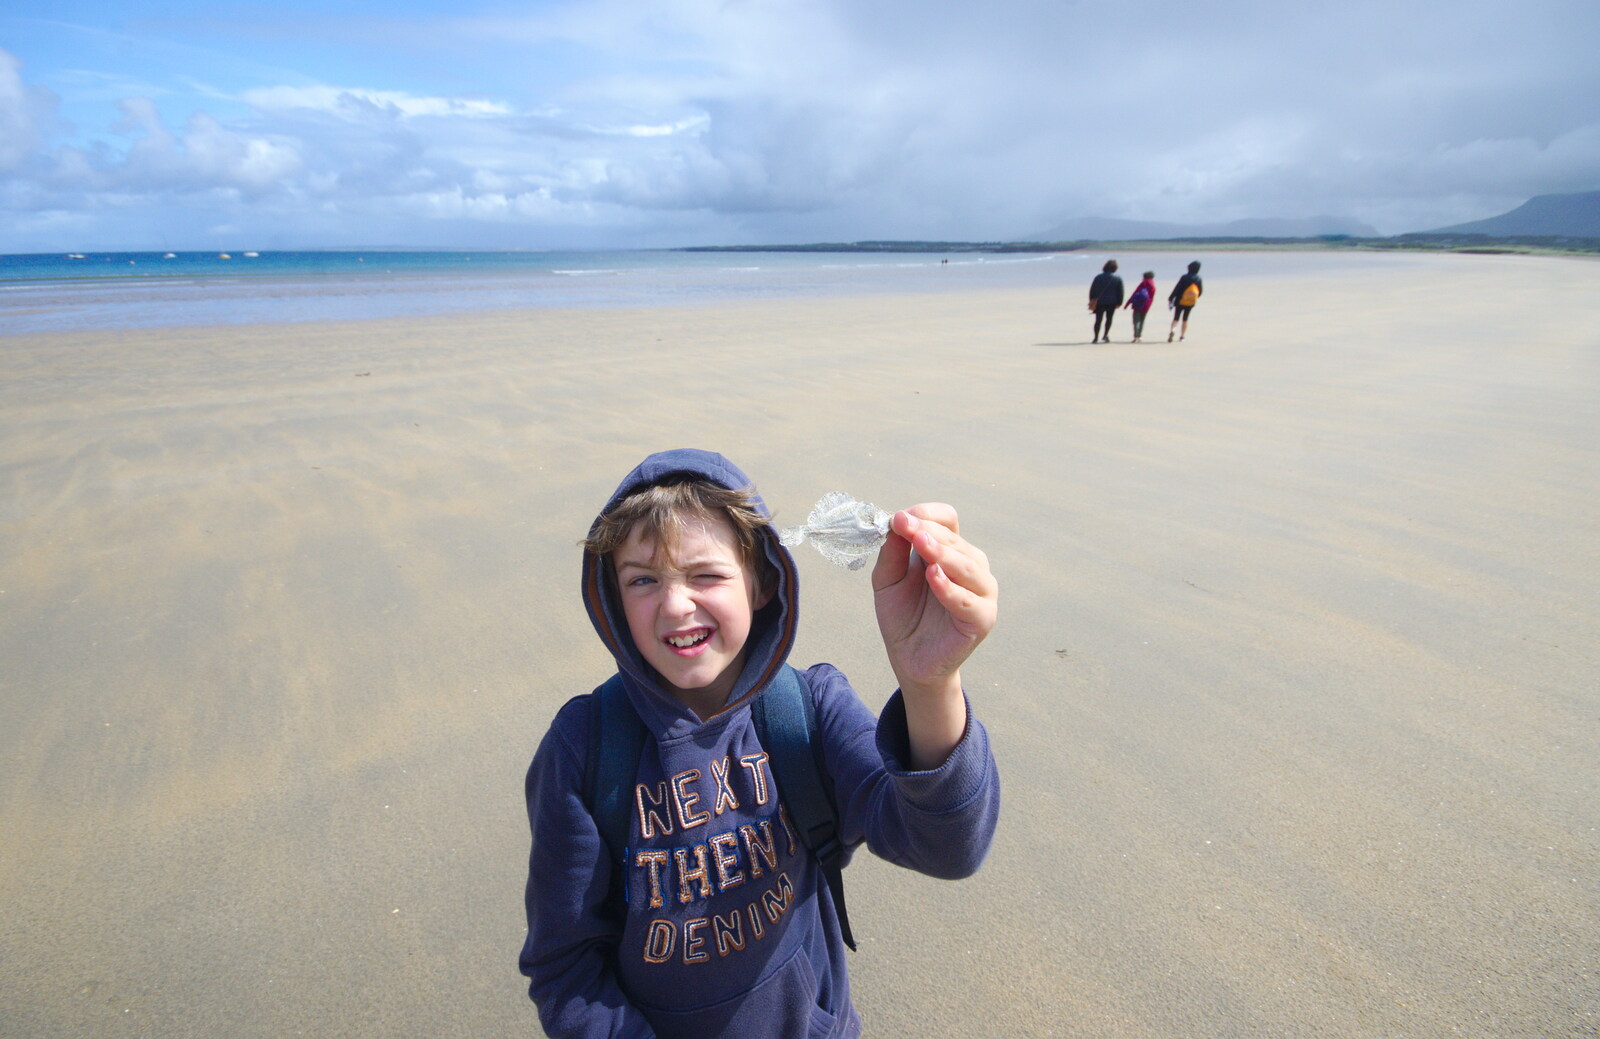 Fred finds a well-preserved dead fish from Mullaghmore Beach and Marble Arch Caves, Sligo and Fermanagh, Ireland - 19th August 2019